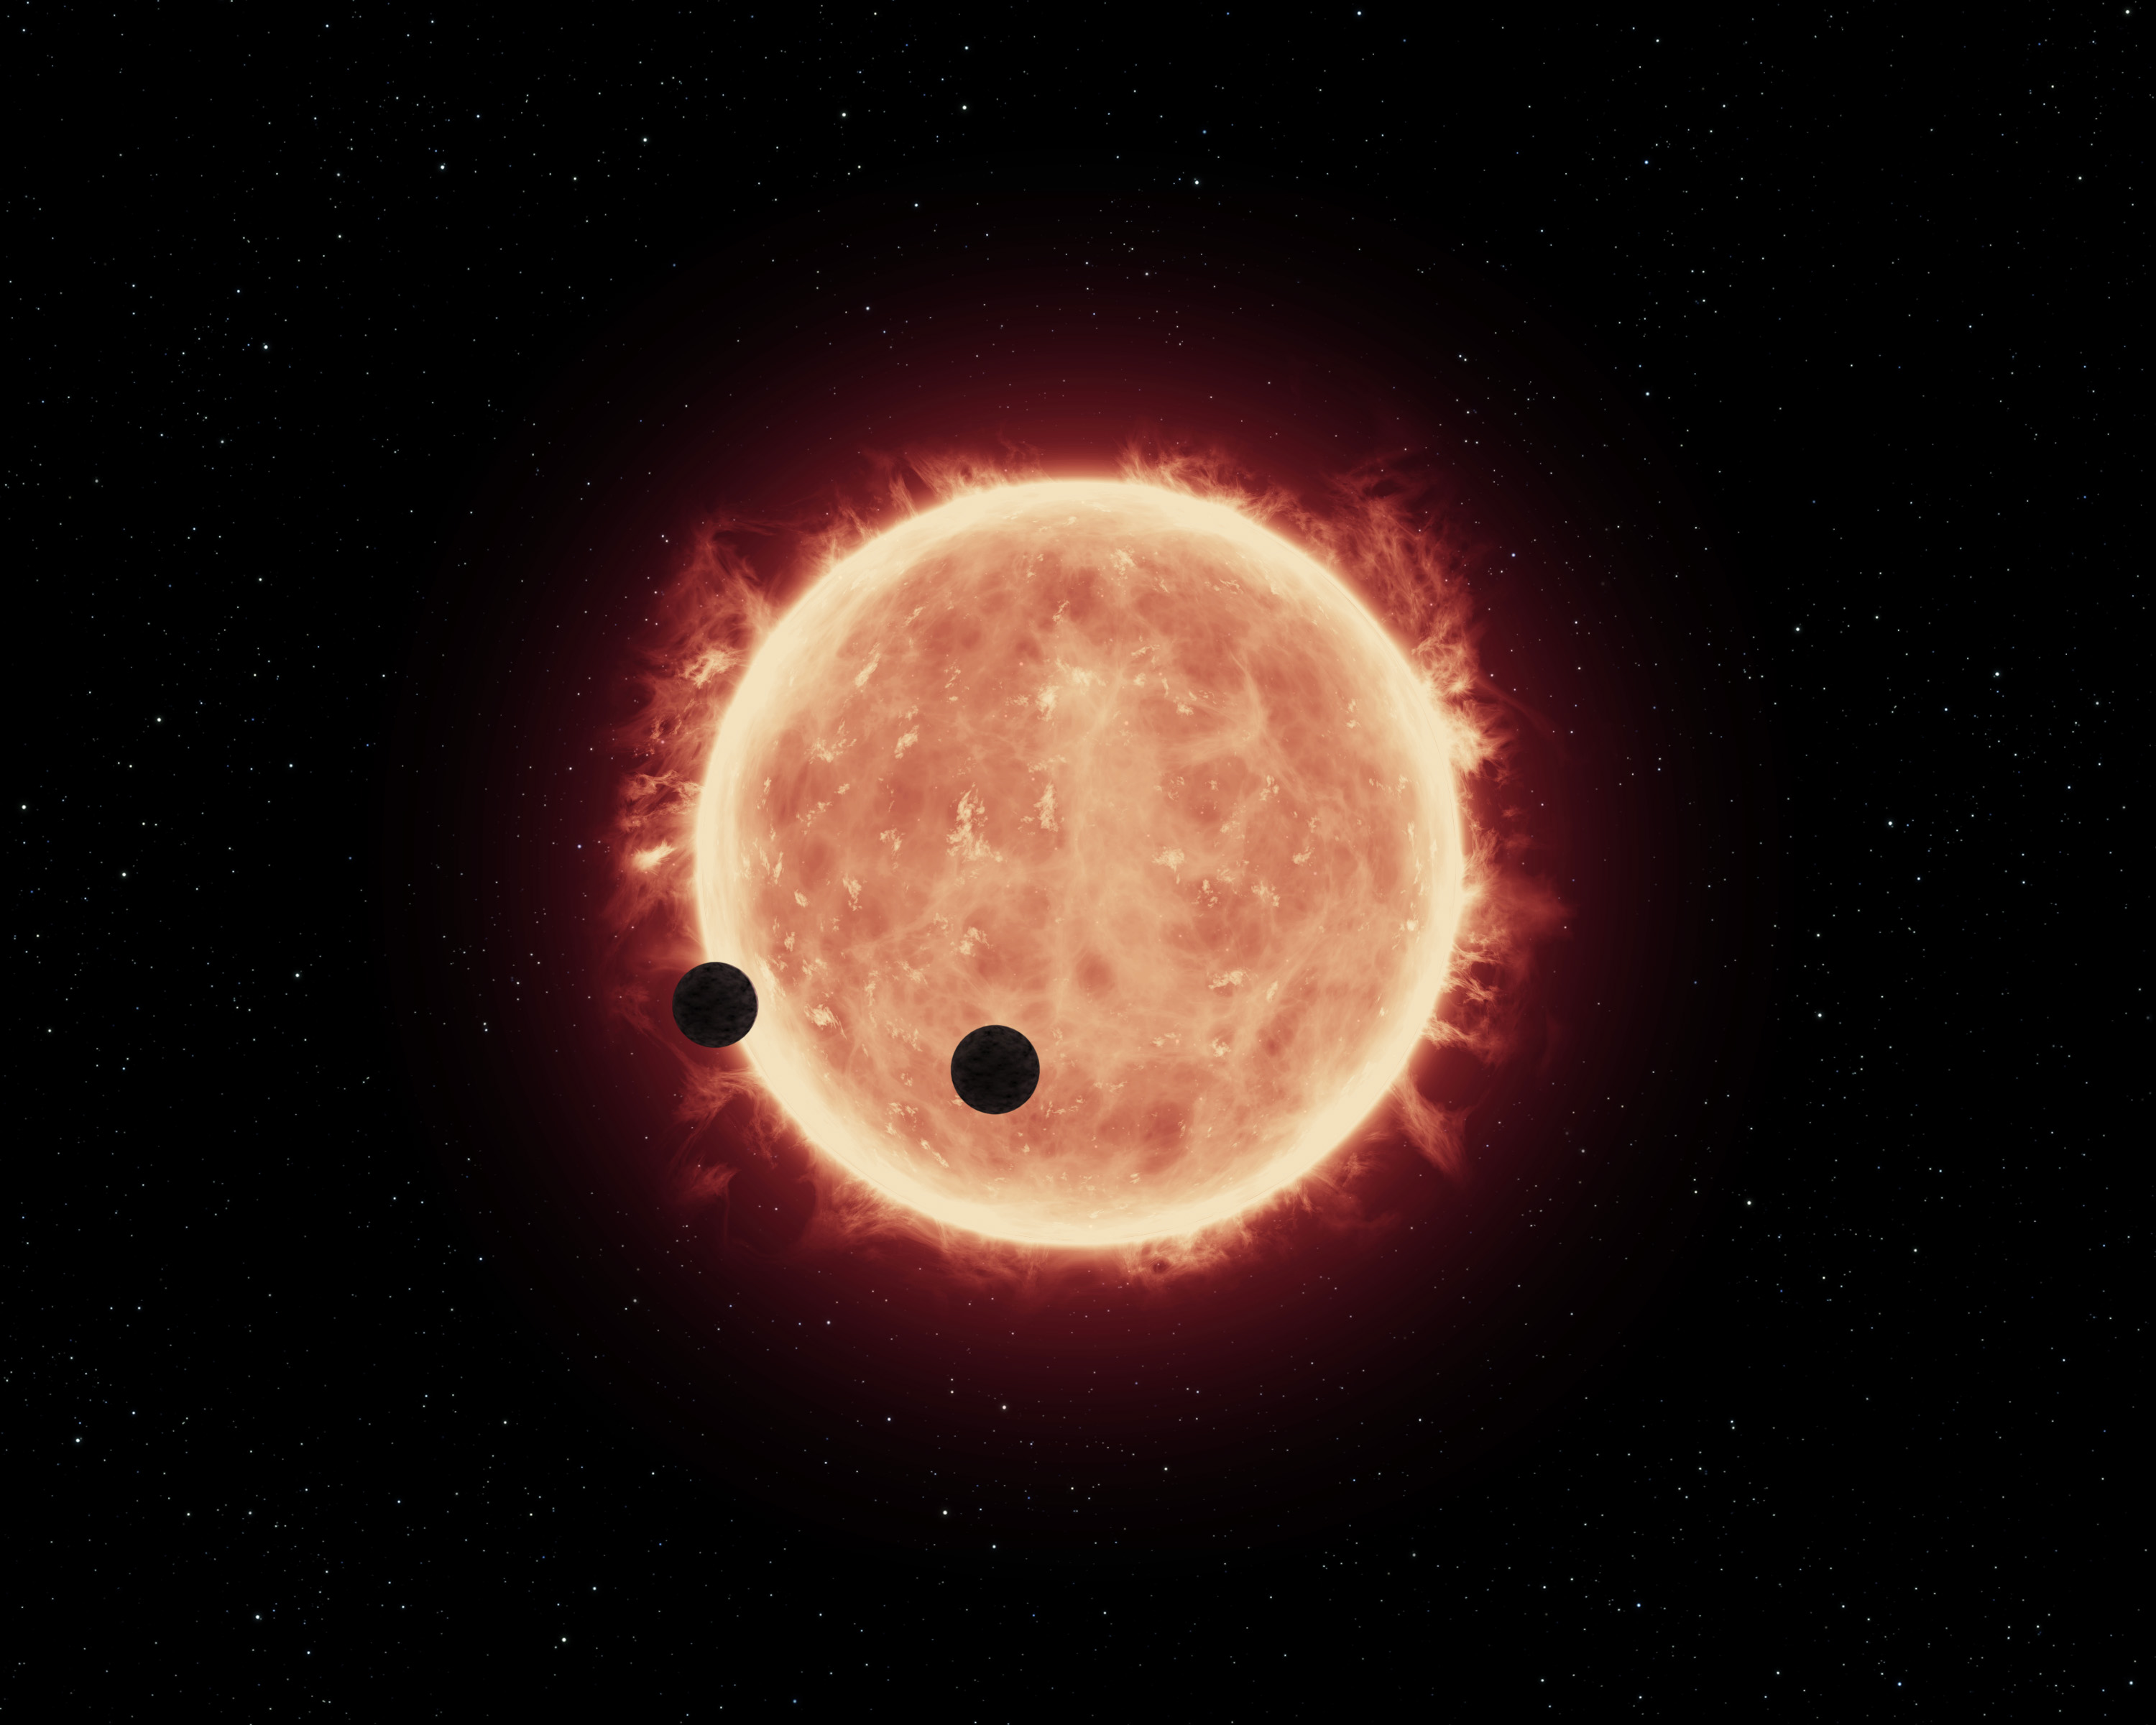 An artist’s depiction of planets transiting a red dwarf star in the TRAPPIST-1 System (Image: Courtesy of NASA/ESA/STScl)